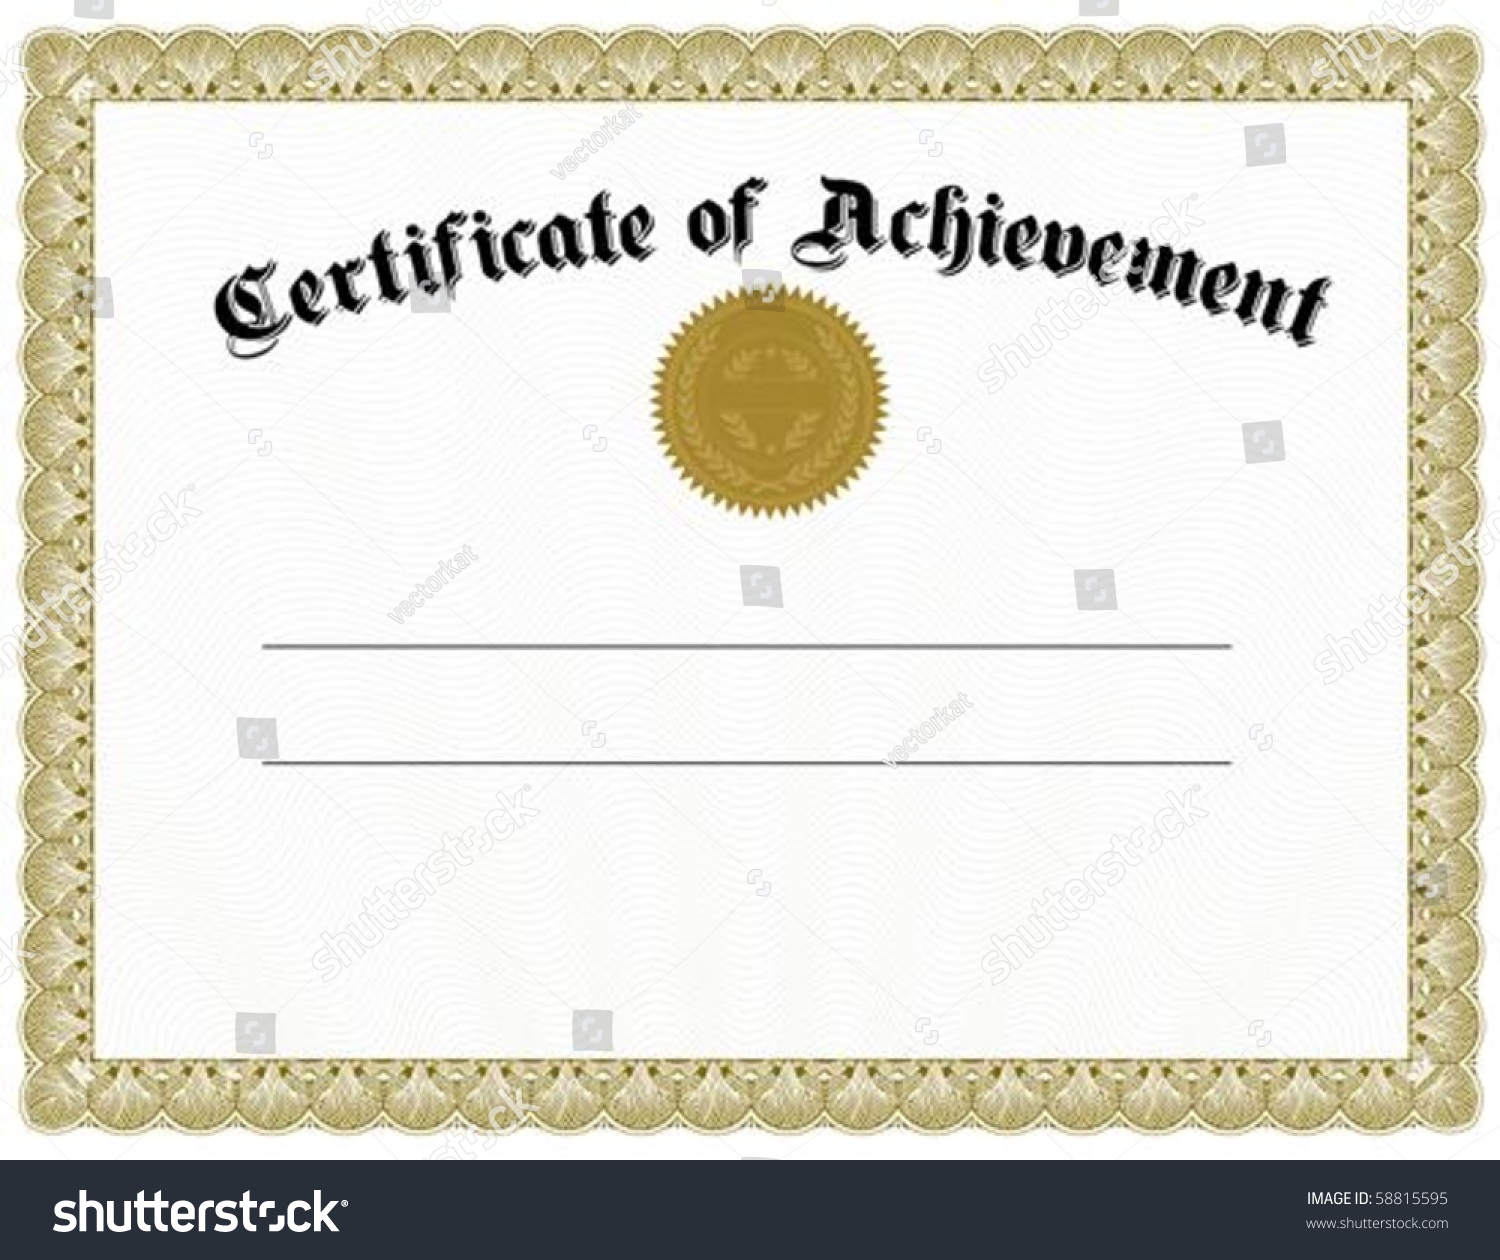 Certificate Template To Edit Vector Certificate Template And Gold Seal. Easy To Edit And Scale. - 58815595 : Shutterstock